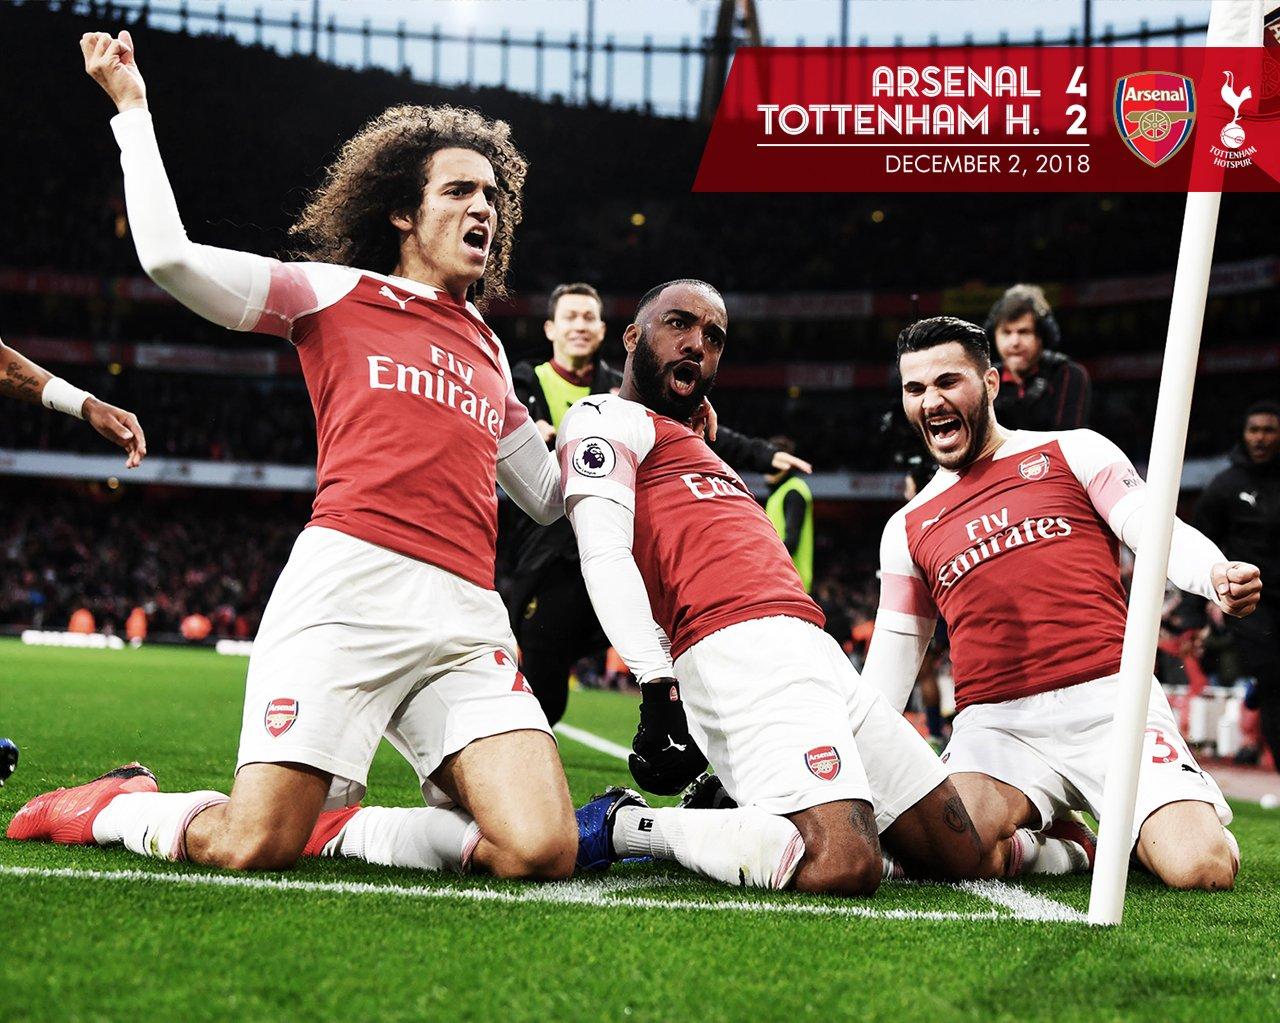 Arsenal Want A Special Nld Desktop Wallpaper Or Lock